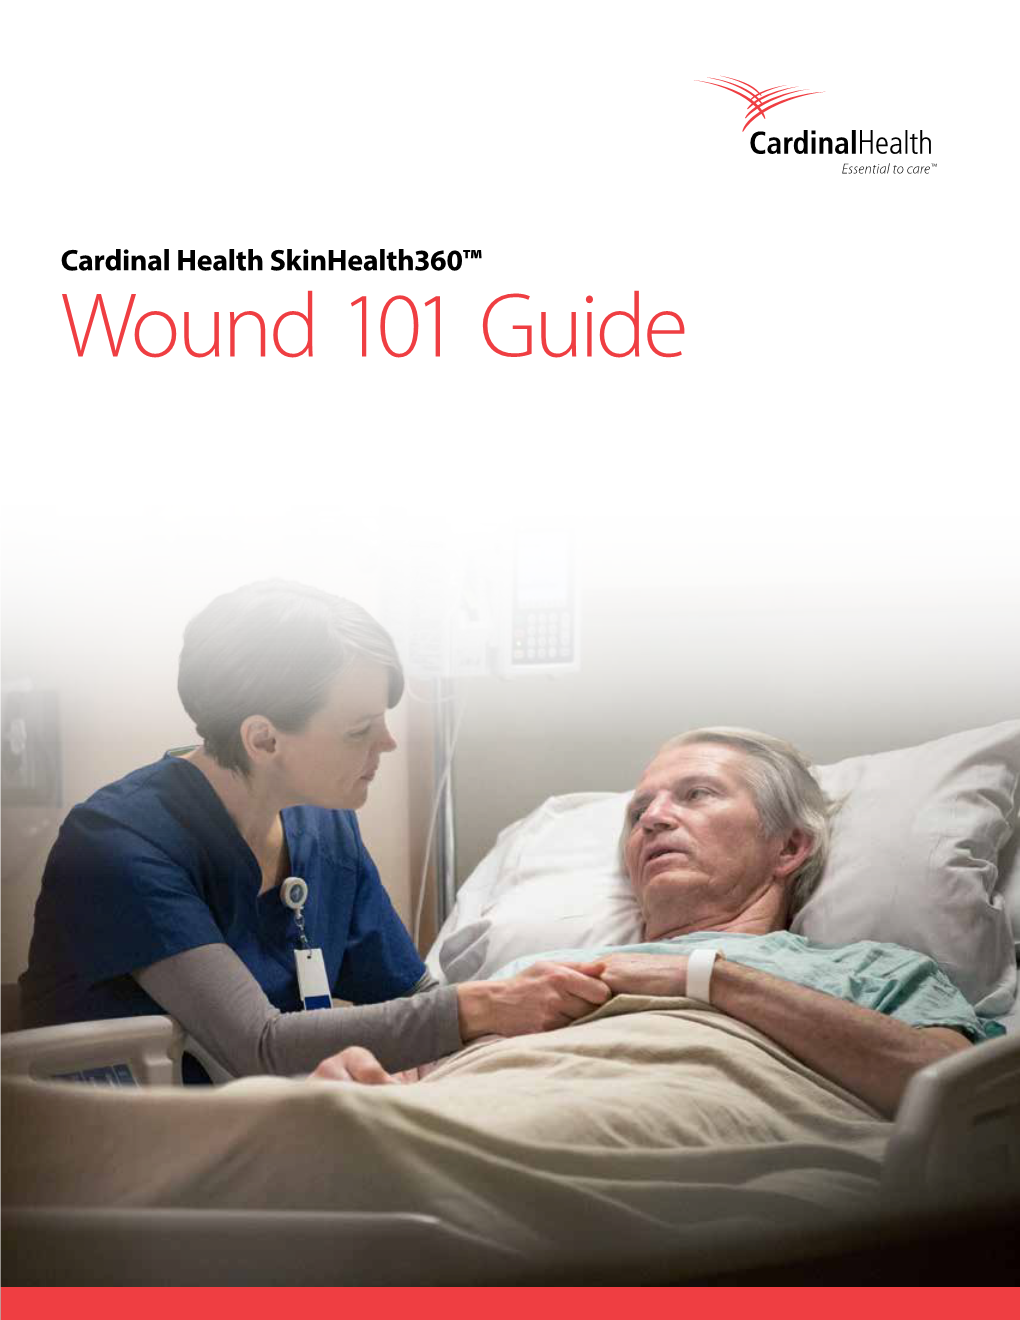 Wound 101 Guide